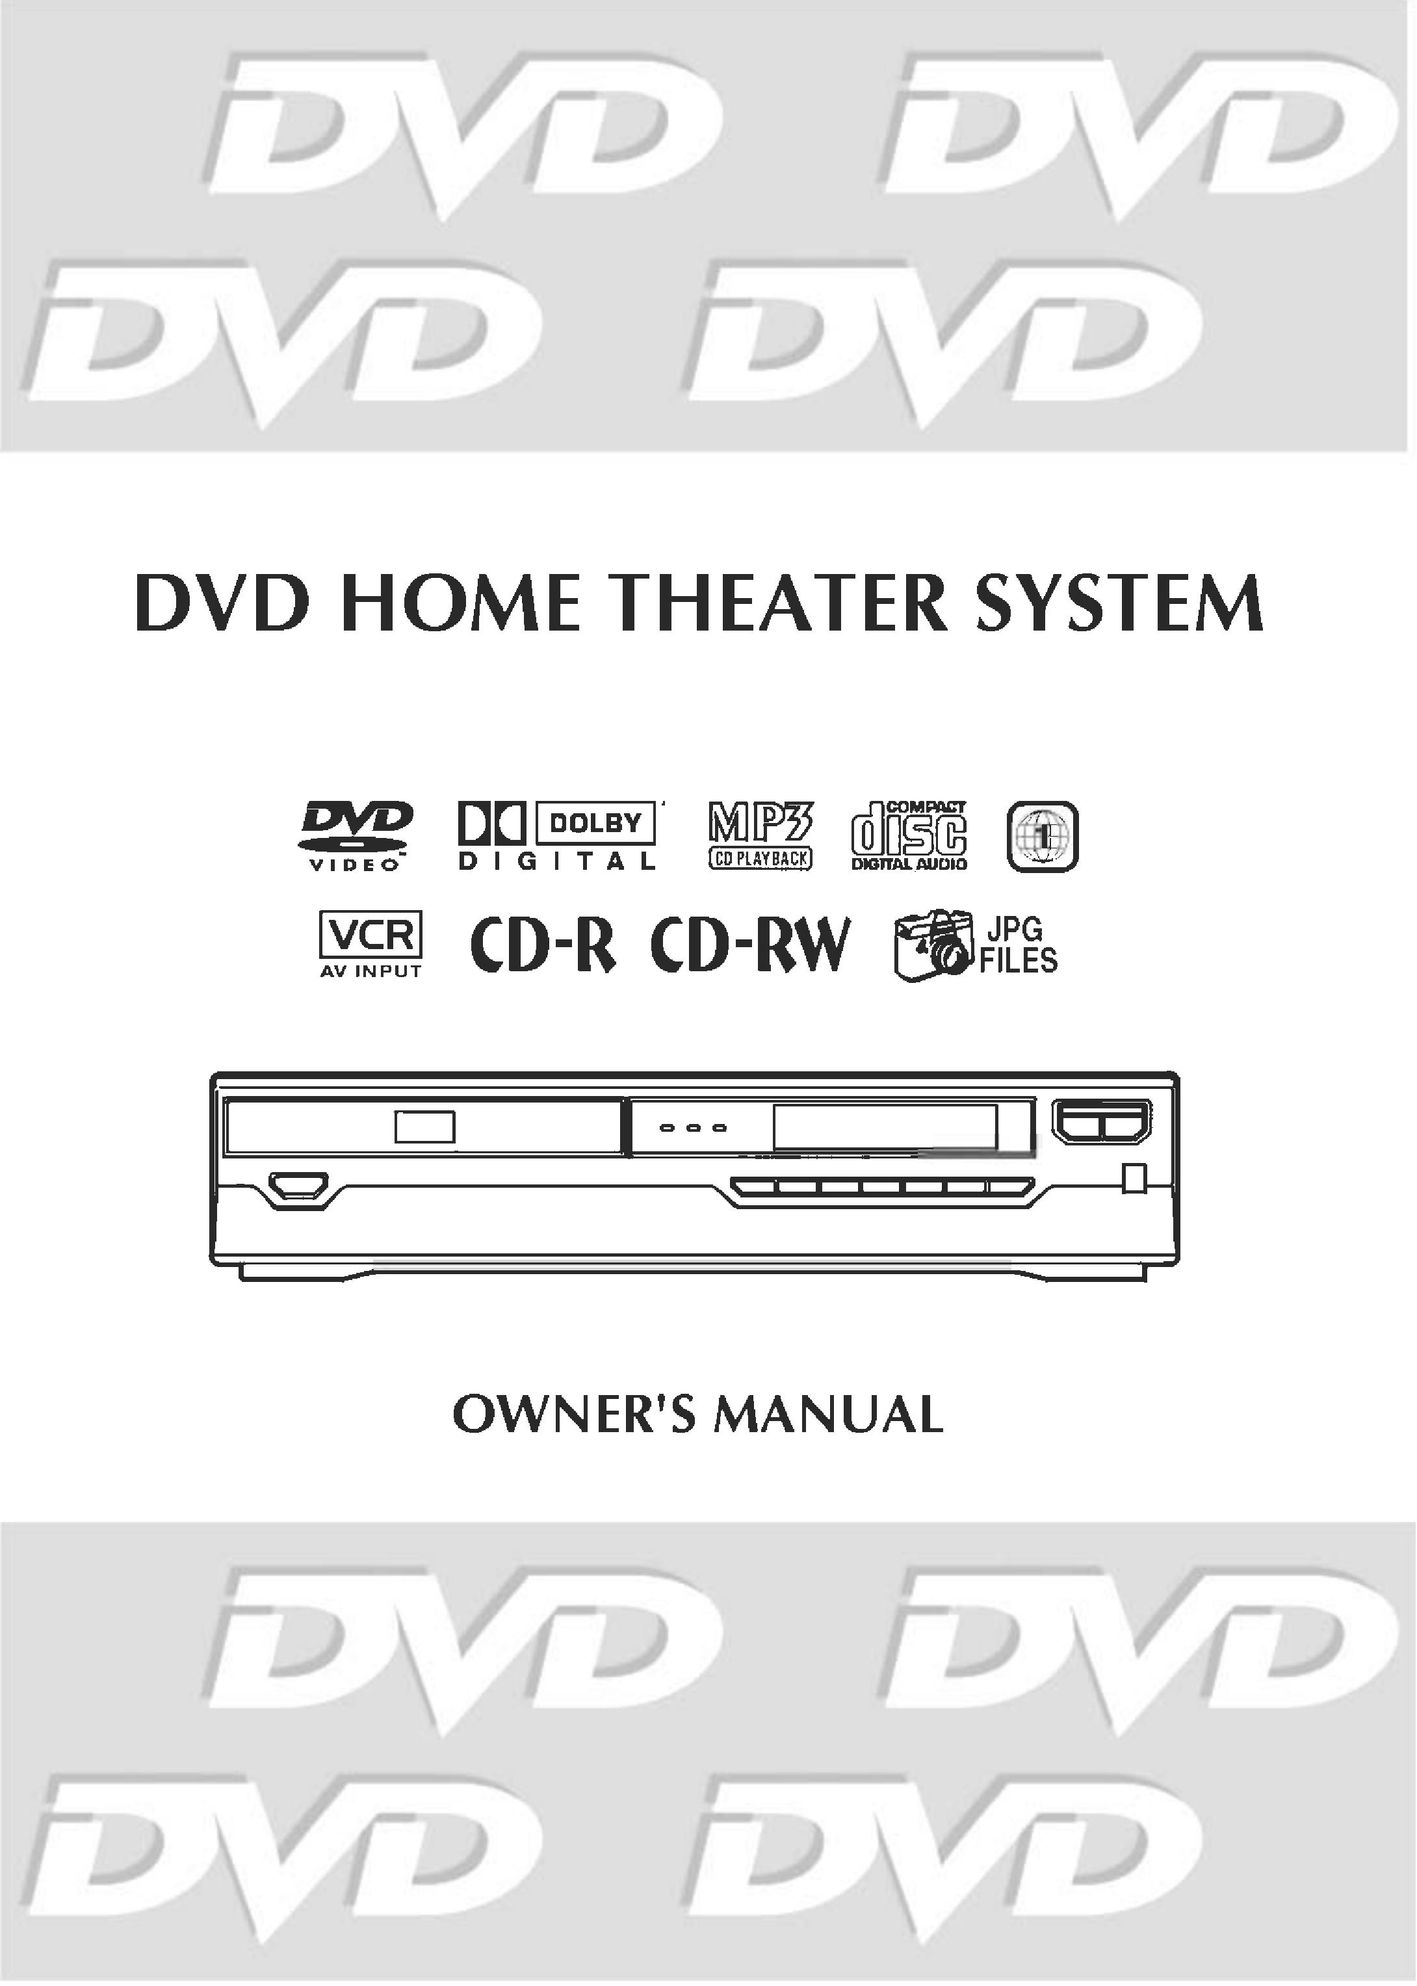 Audiovox DVD Home Theater System DVD Player User Manual